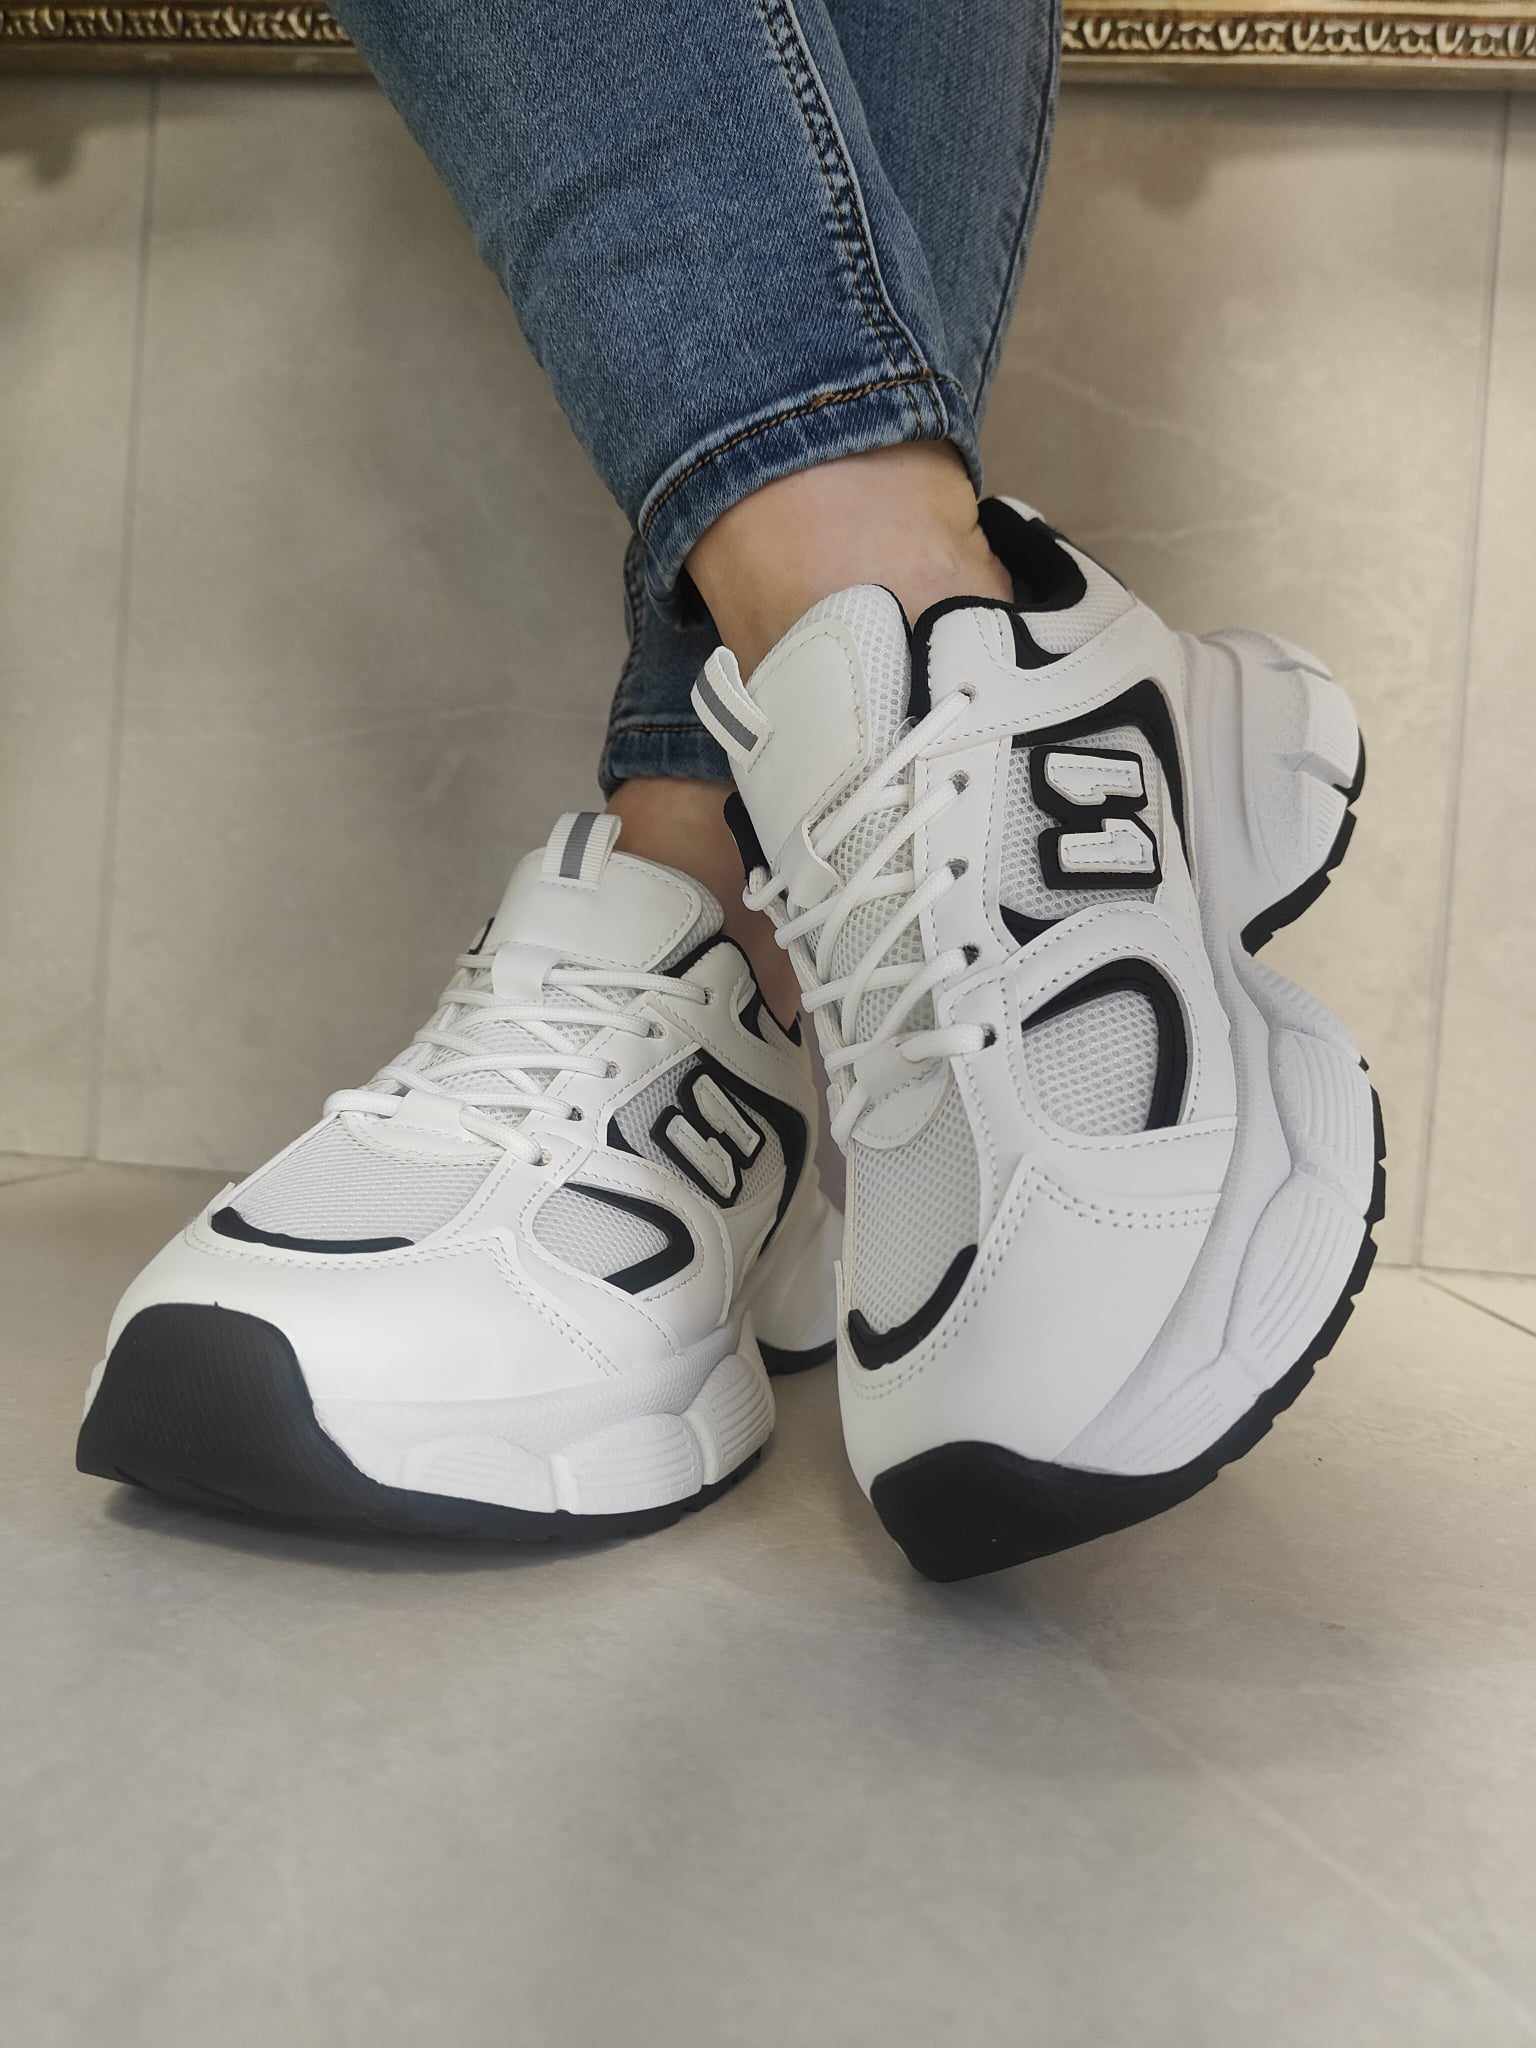 Inspired Trainers Black/White